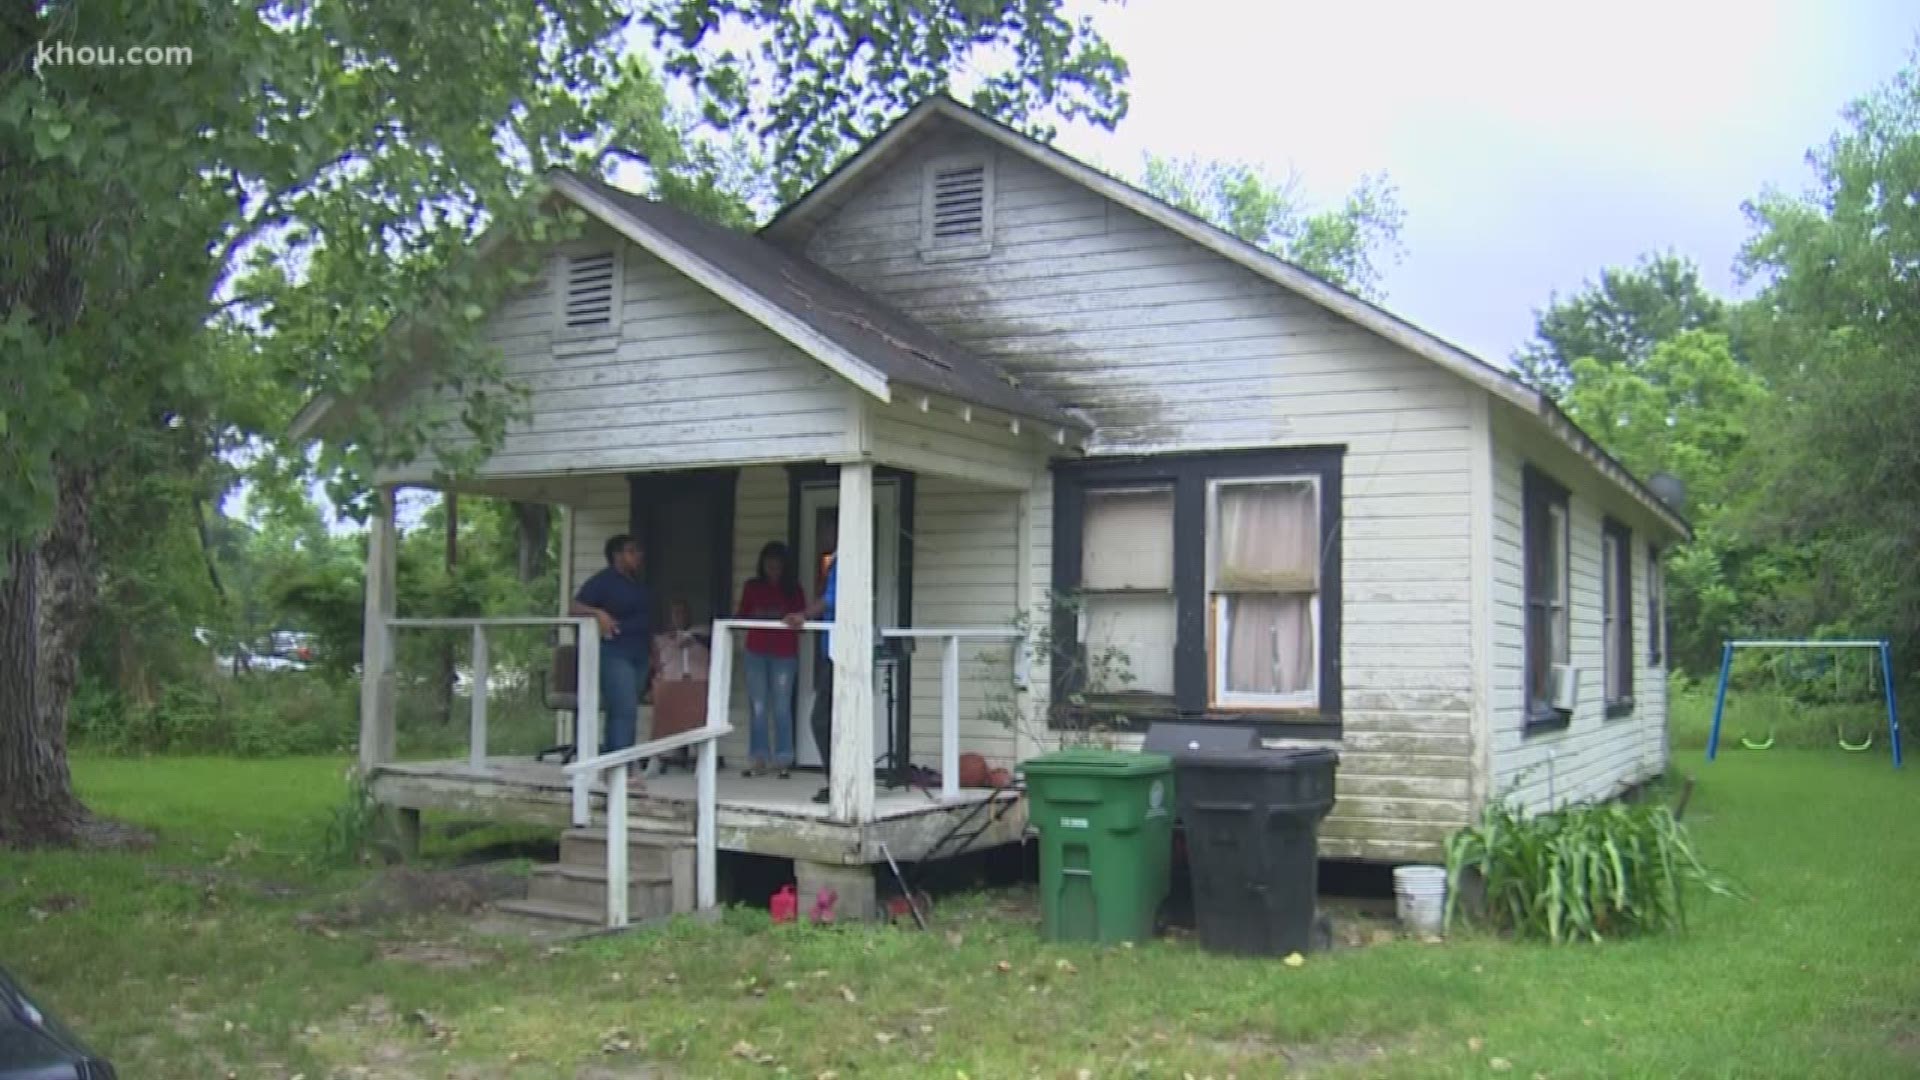 A 70-year-old woman could be evicted from the only home she's ever lived in after her home was sold in an auction. Crew's new attorney's have requested an emergency meeting with hopes of delaying the eviction.